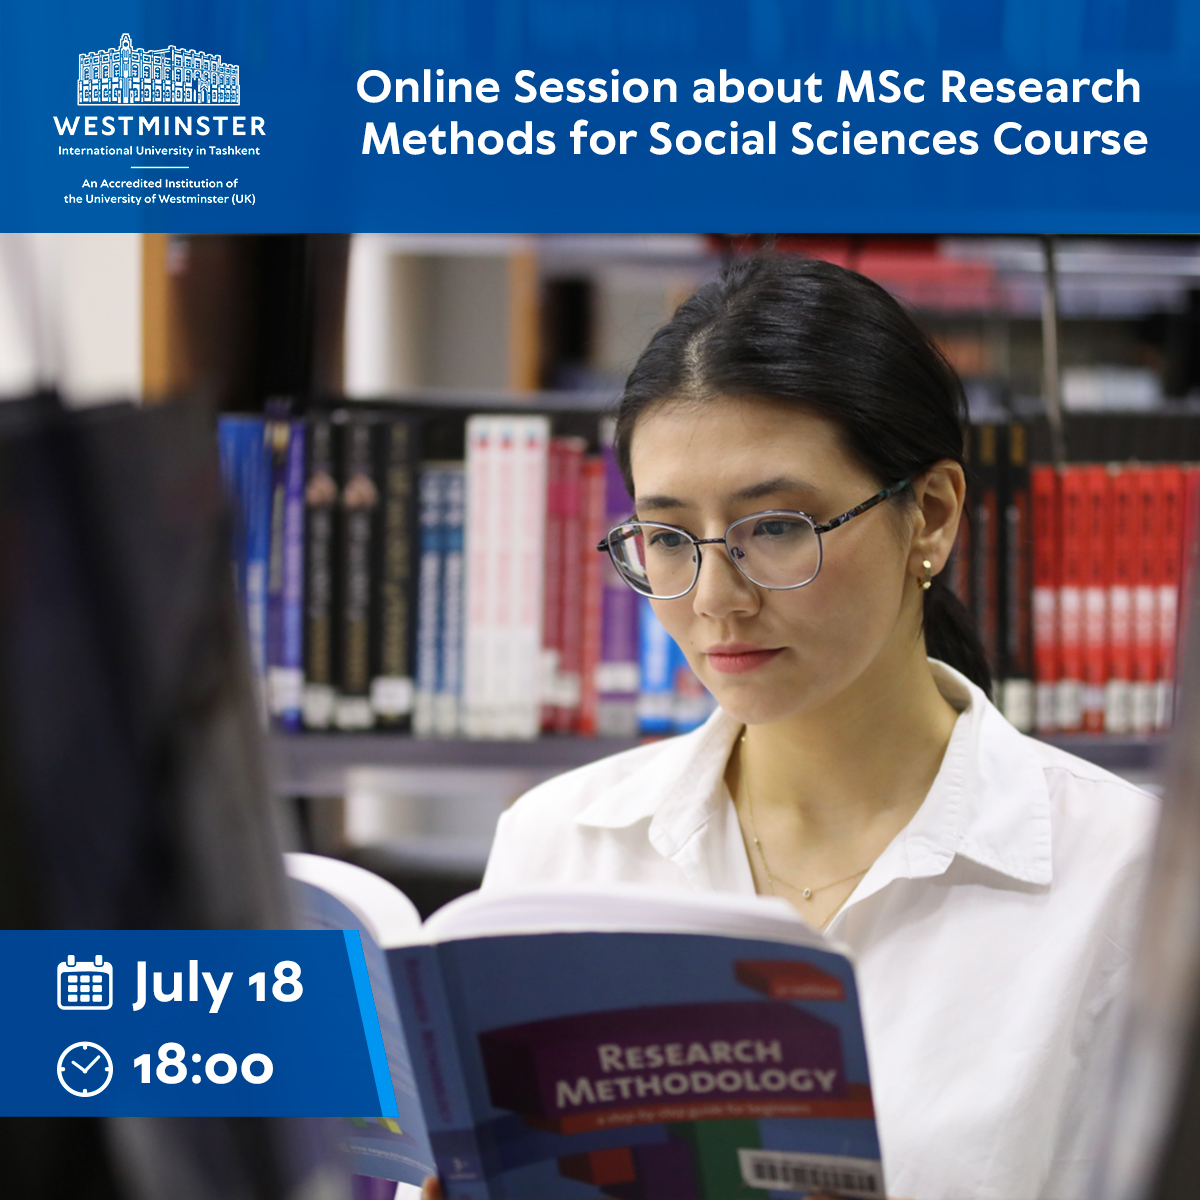 Join us for an insightful online session on WIUT's MSc in Research Methods for Social Sciences course!